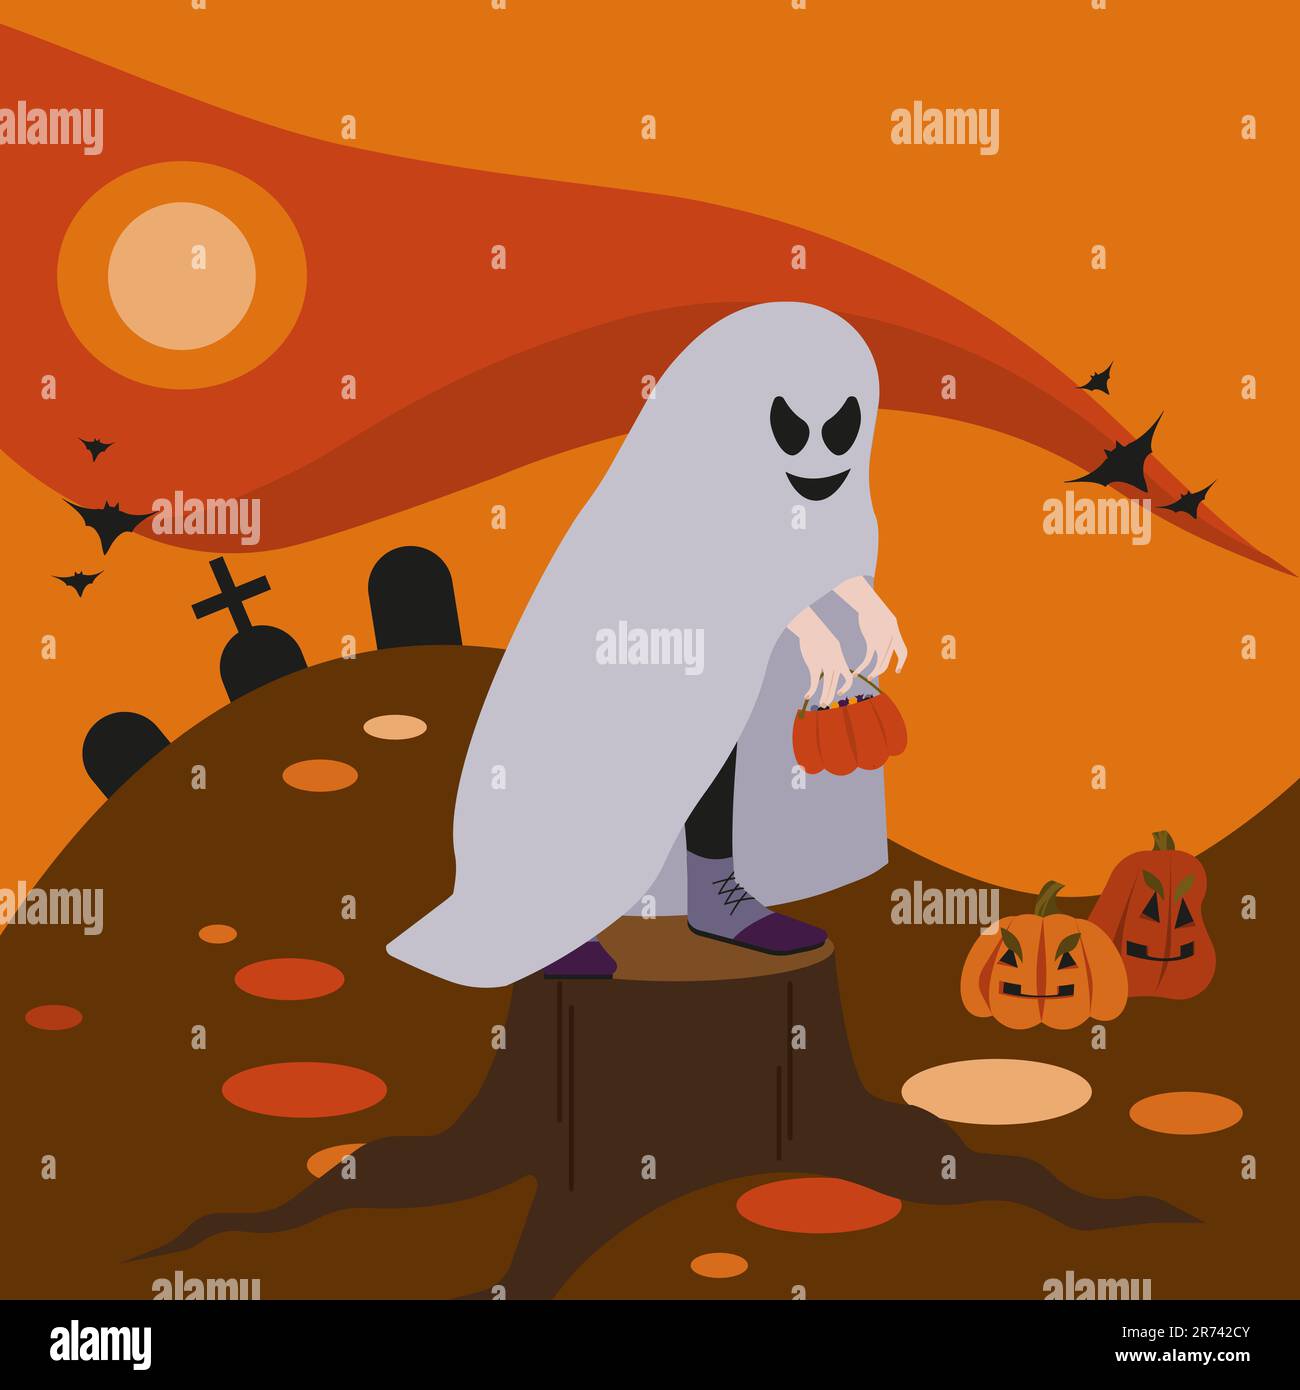 Halloween kid with evil smiling ghost mantle standing on a stump, holding bags with candies. Pumpkins and graves aside. Orange and red sky, yellow moo Stock Vector